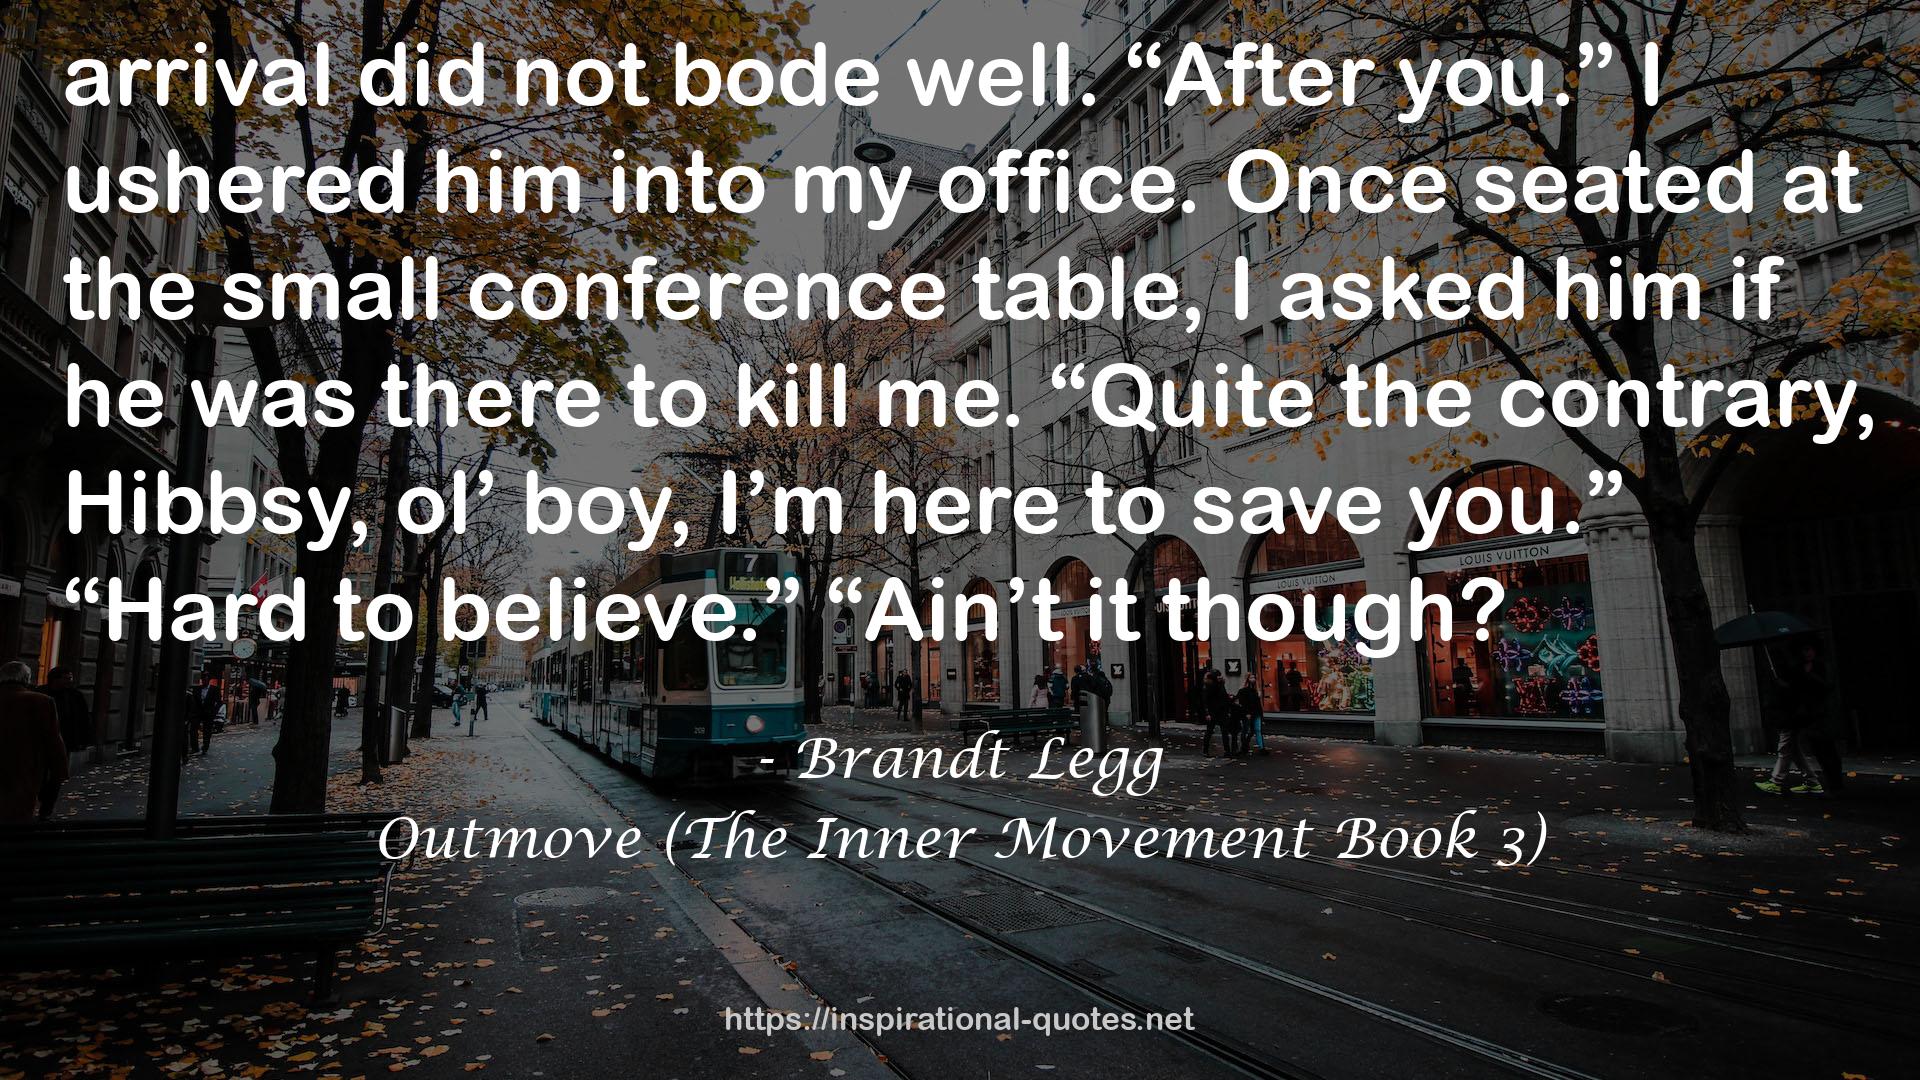 Outmove (The Inner Movement Book 3) QUOTES